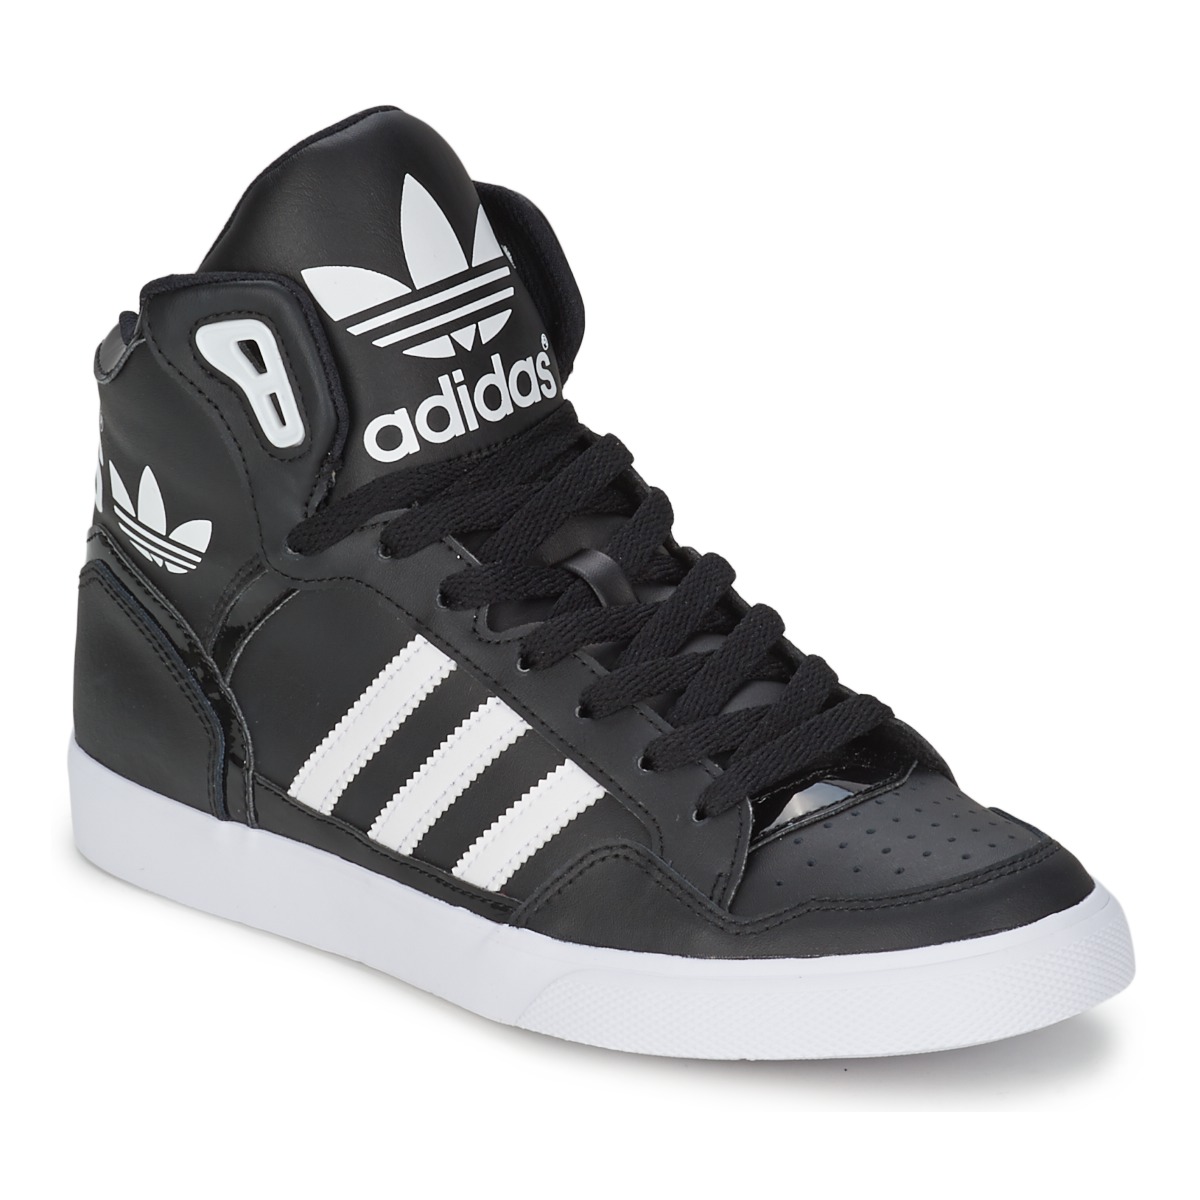 adidas chaussures montantes